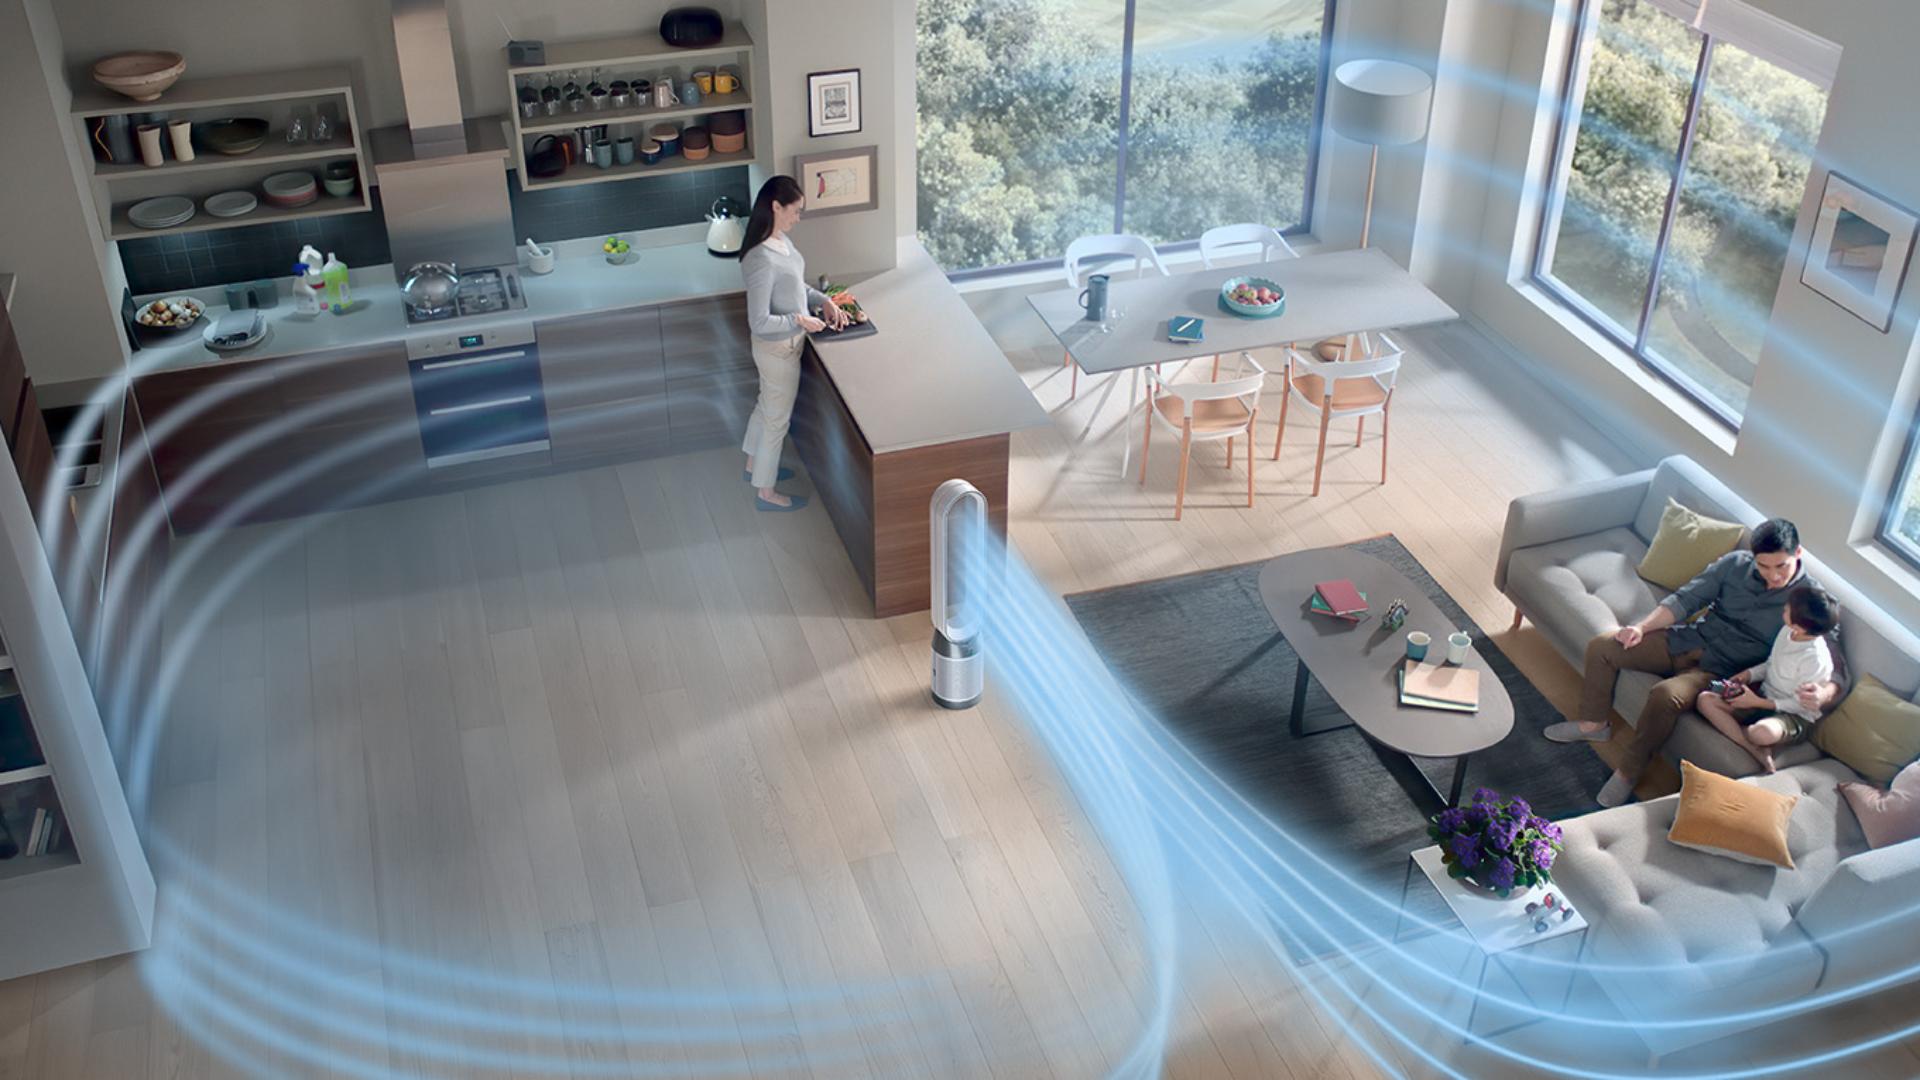 The airflow of a Dyson purifier purifying the whole room